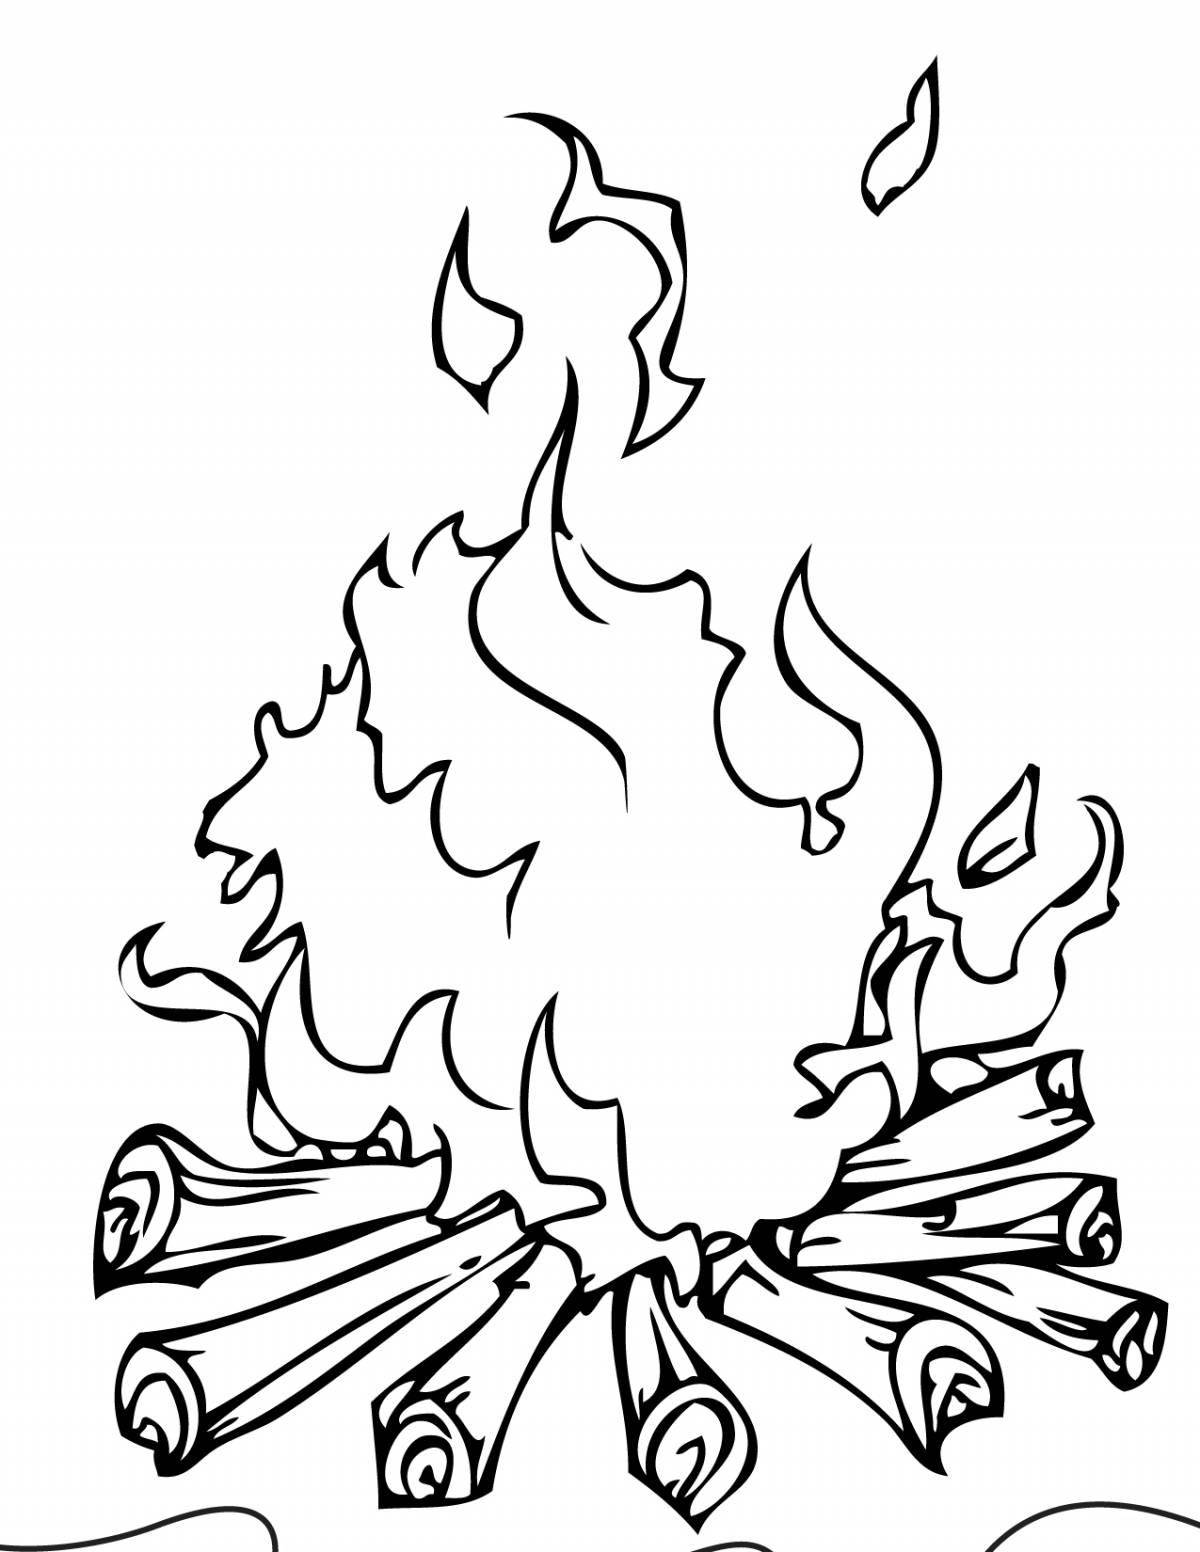 Volcanic forest fire coloring page